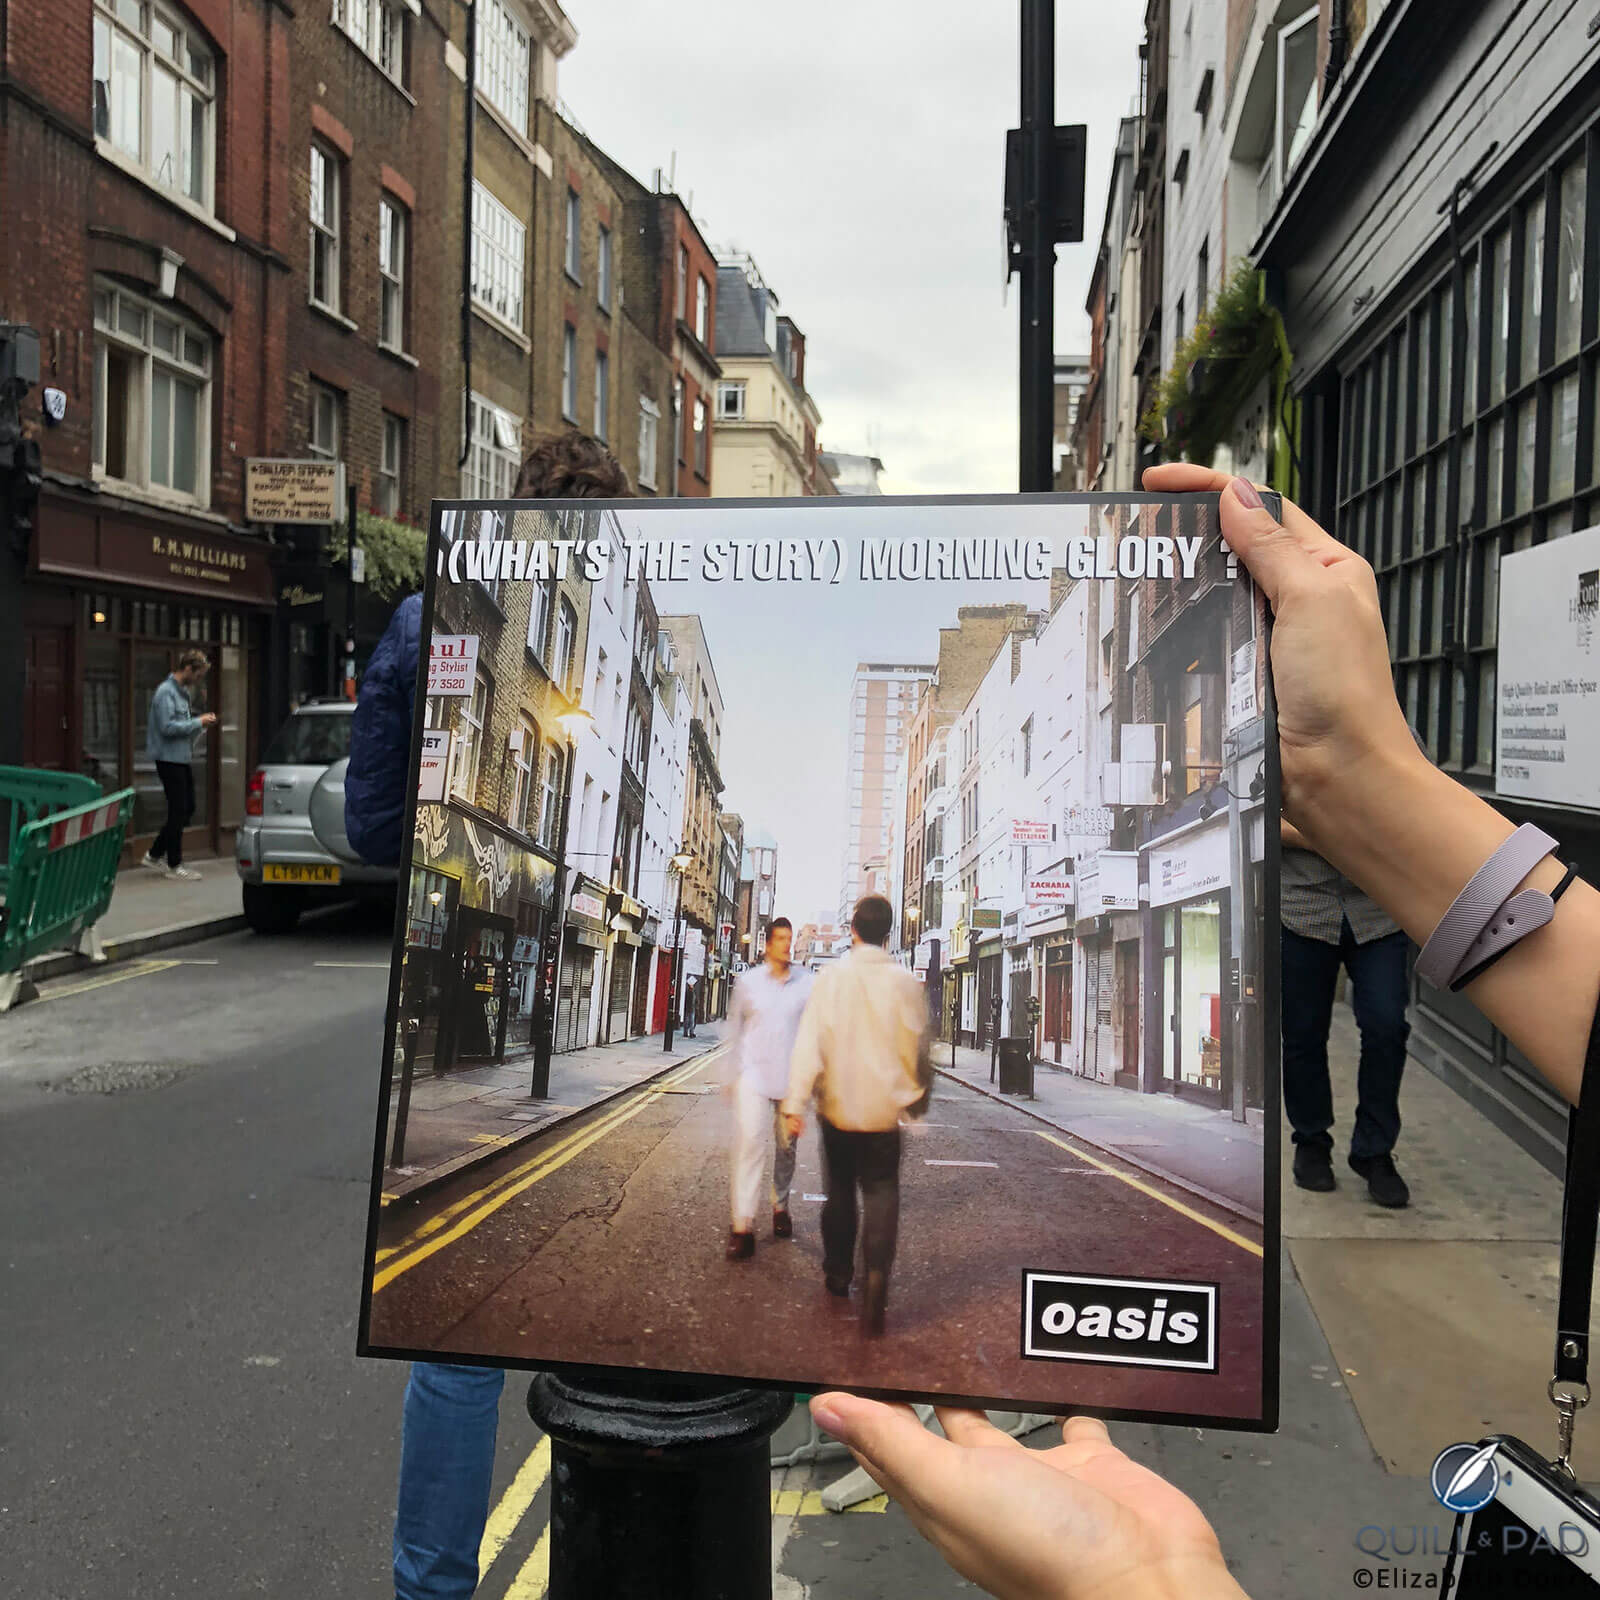 Berwick Street, London: where Oasis’s ‘(What’s The Story) Morning Glory’ was photographed